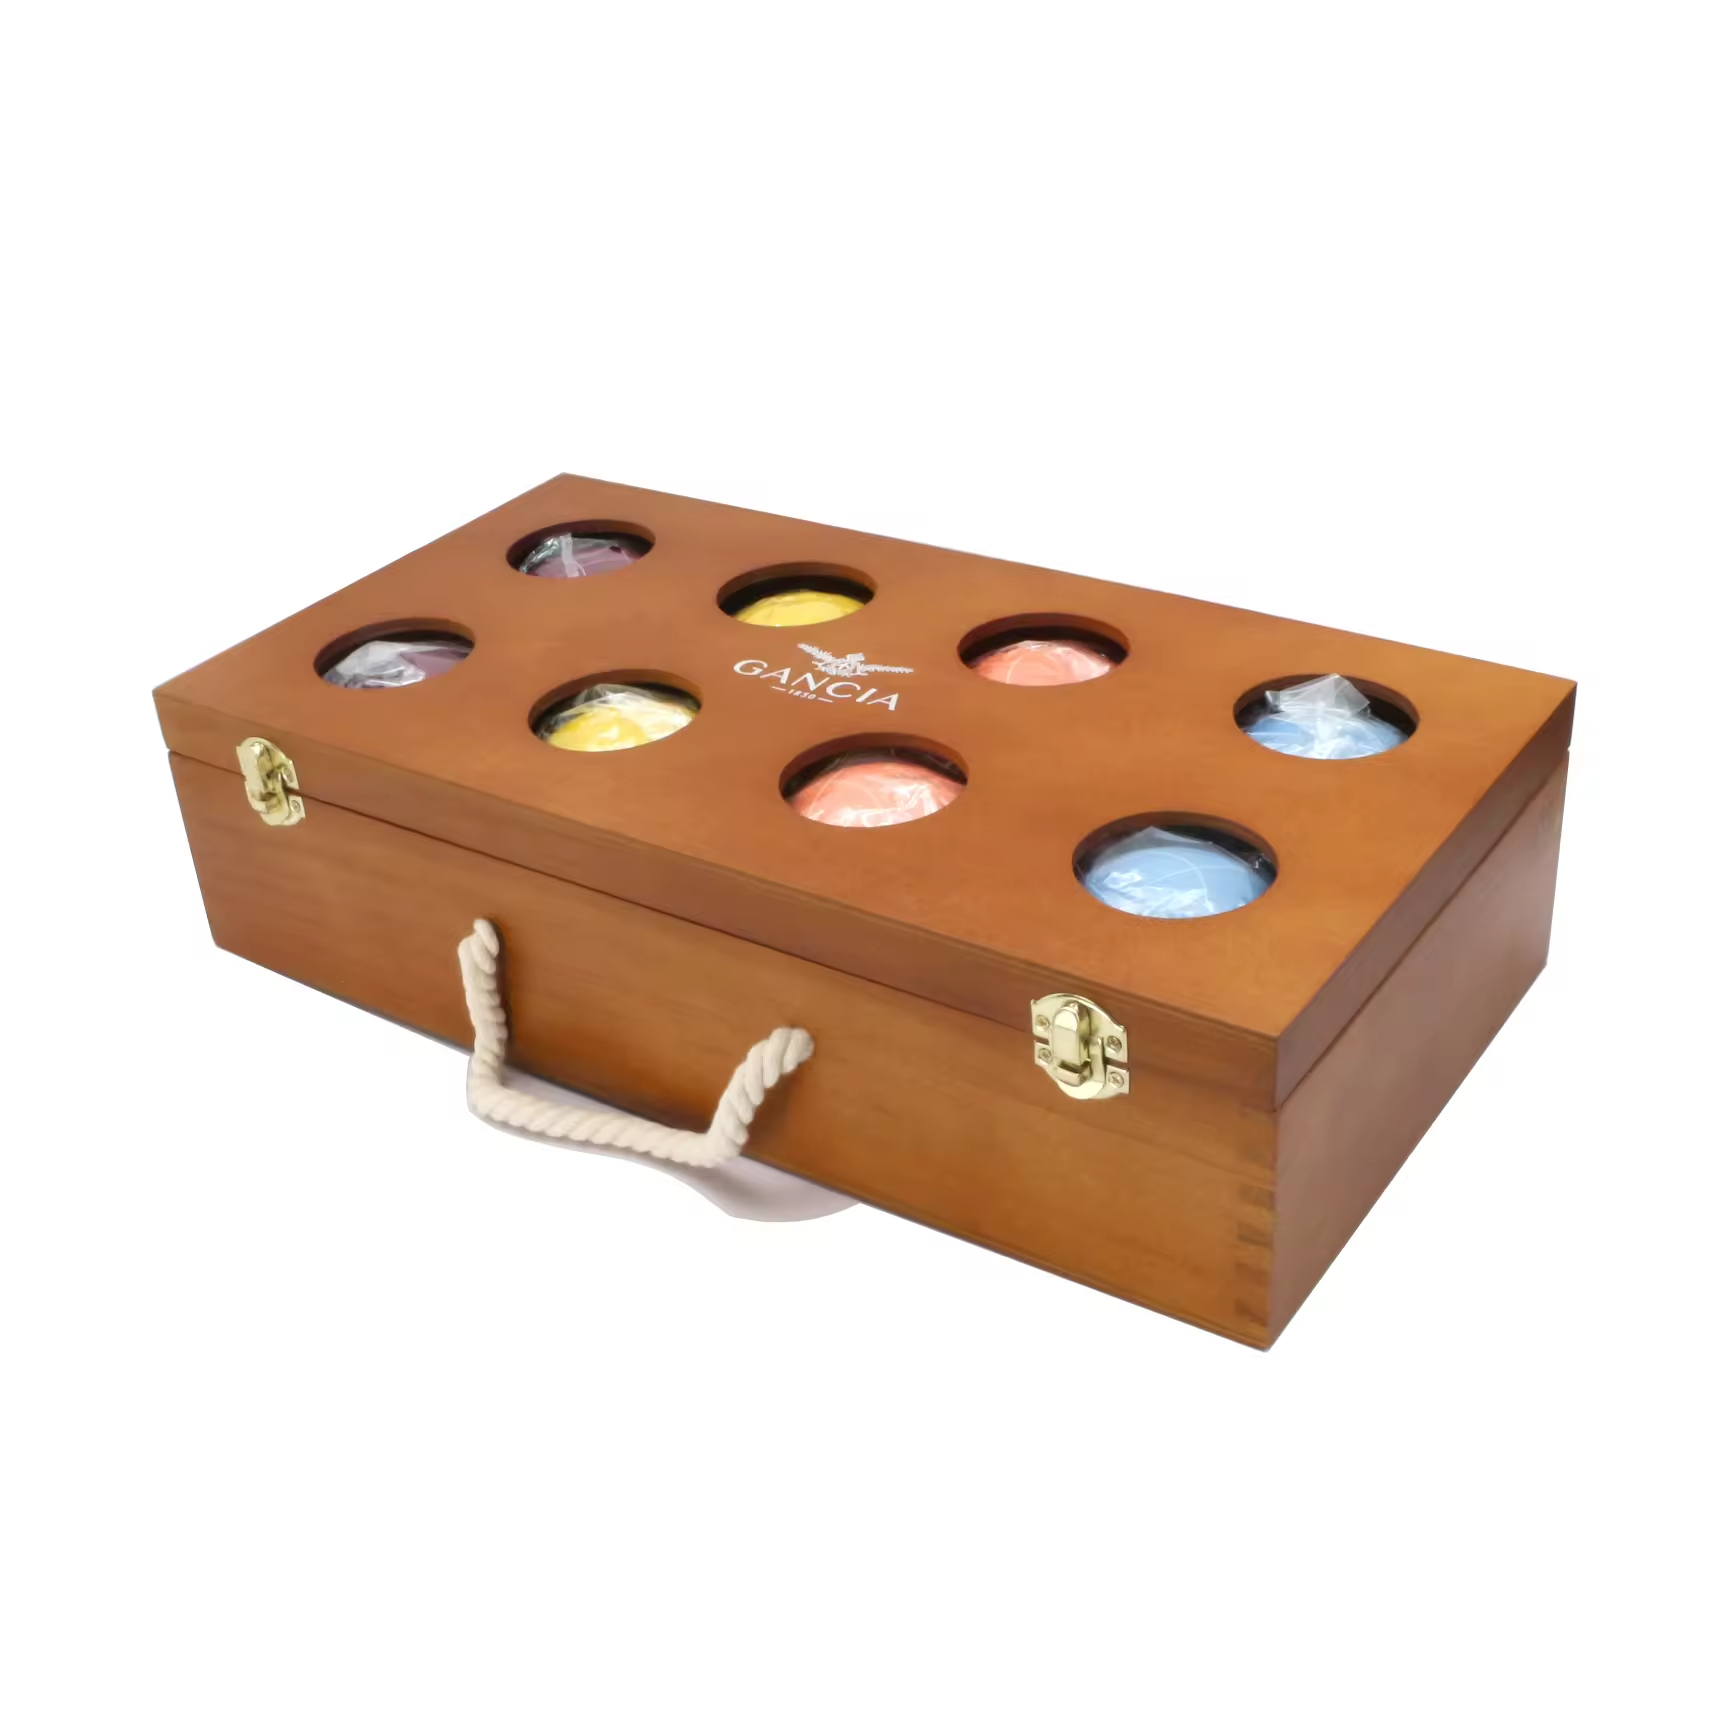 90mm Vintage Bocce Ball Set with 8 Balls Pallino Case Measuring Rope Wooden Carrying Box for Yard CN Plug Type